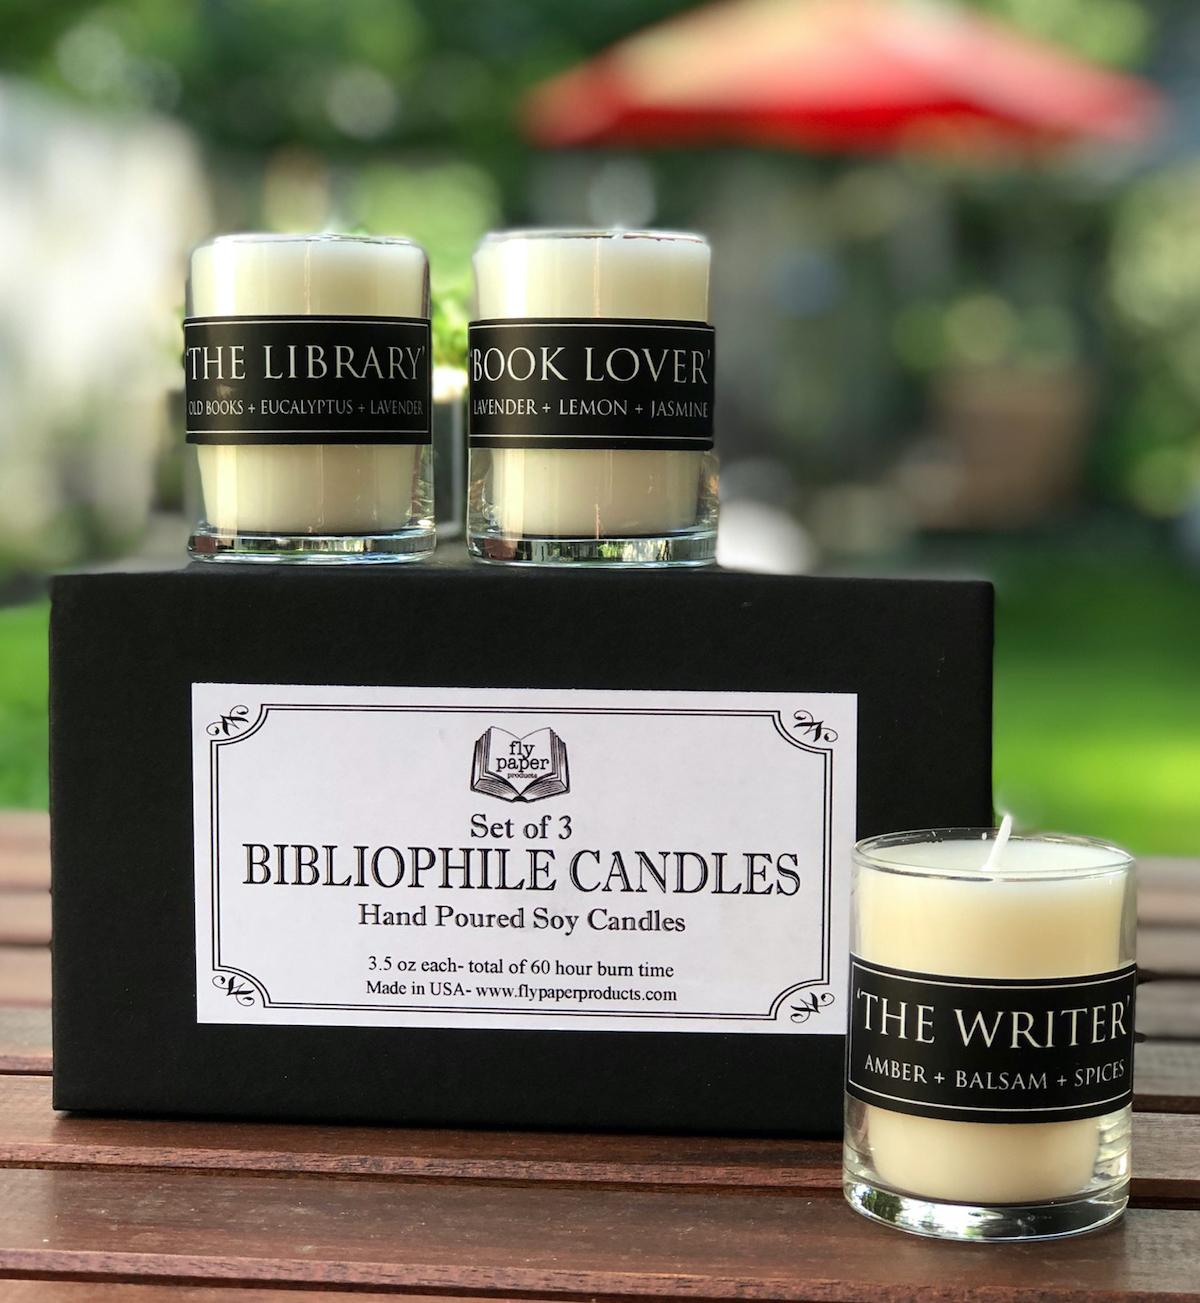 Book lover candles as an unusual but great shower gifts 